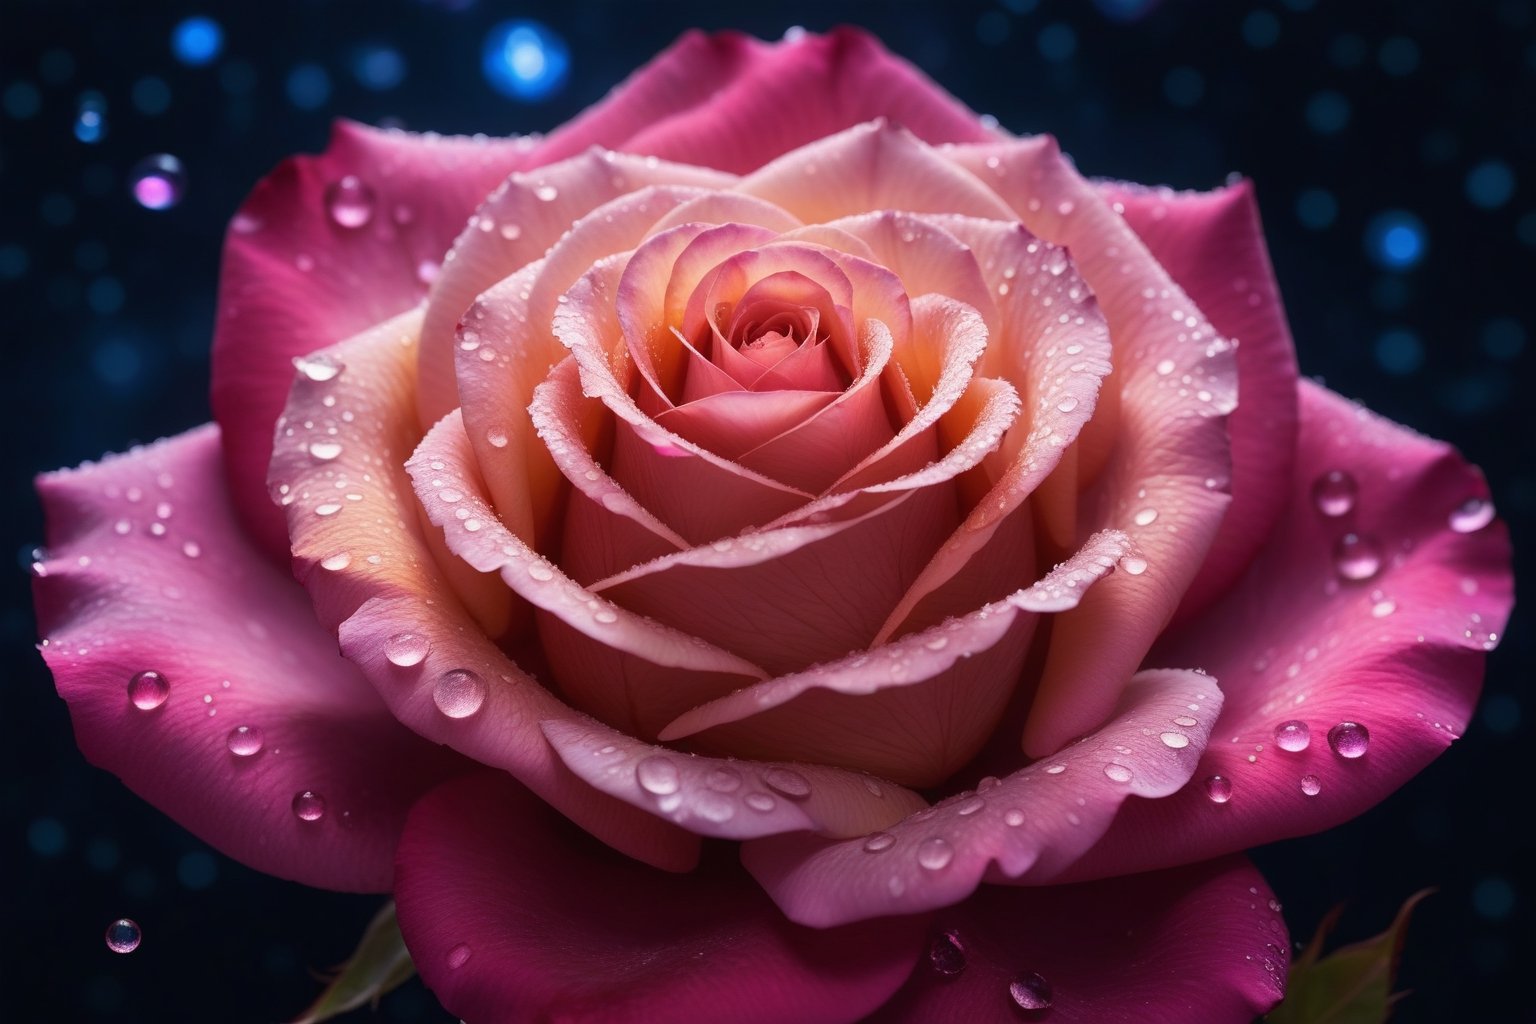 Macro Photography, a galaxy rose with a galaxy on each rose petal, shining starlight, spacey nebula  background, Dark background,Extreme Detail,UHD,8K,Studio Lighting,Professional Photography,fine art,,water droplets on rose petals,,  cupidtech, machine,